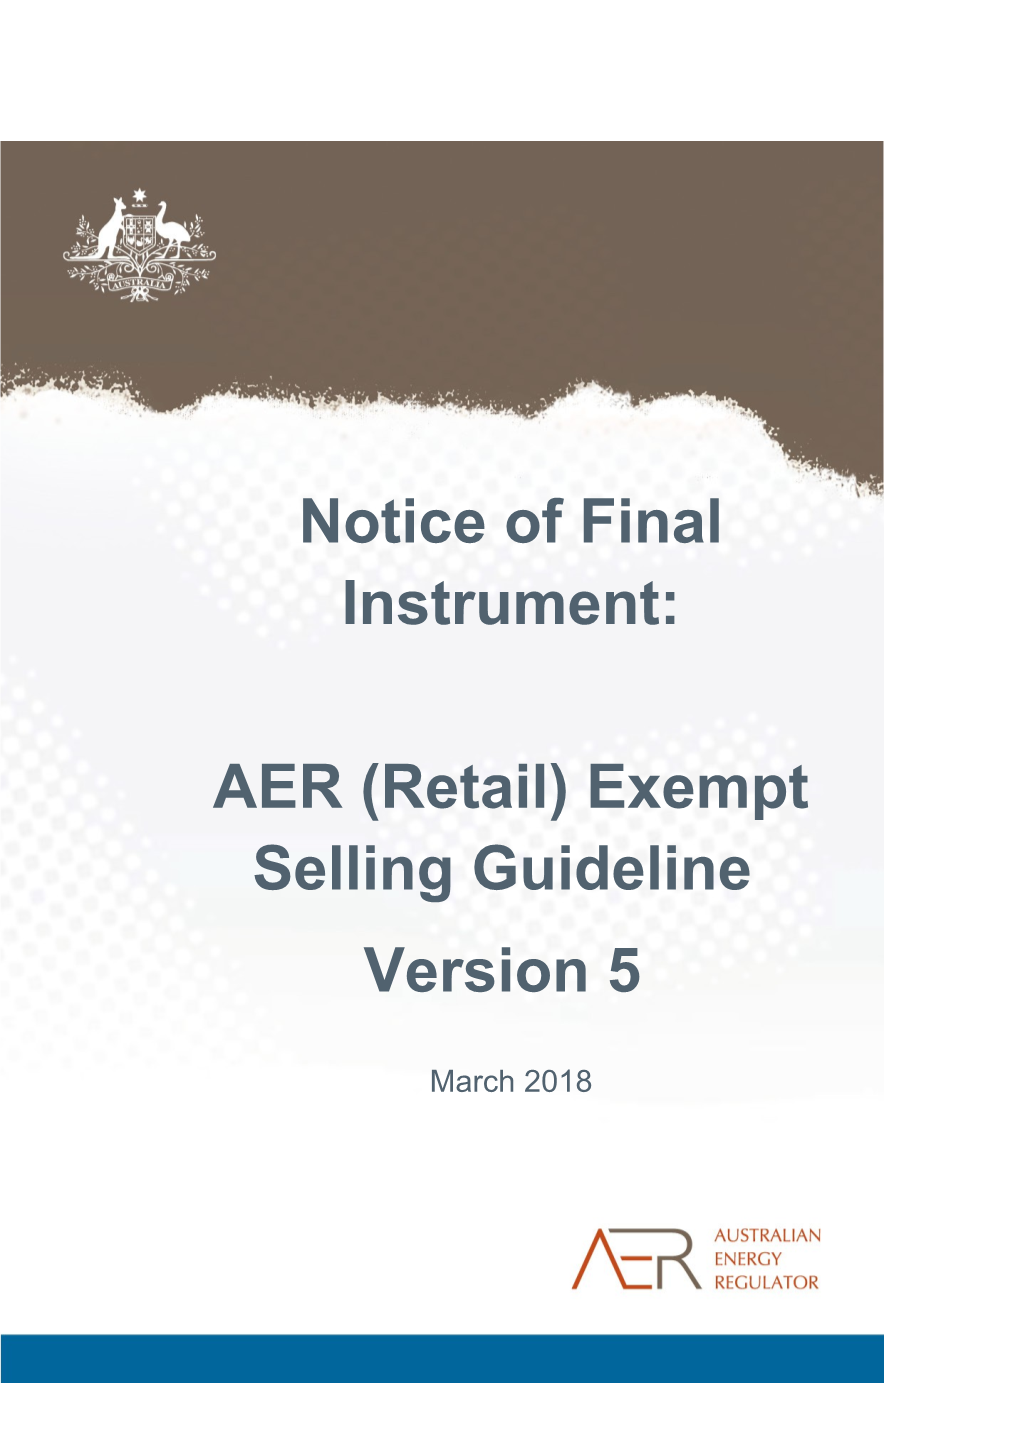 AER (Retail) Exempt Selling Guideline